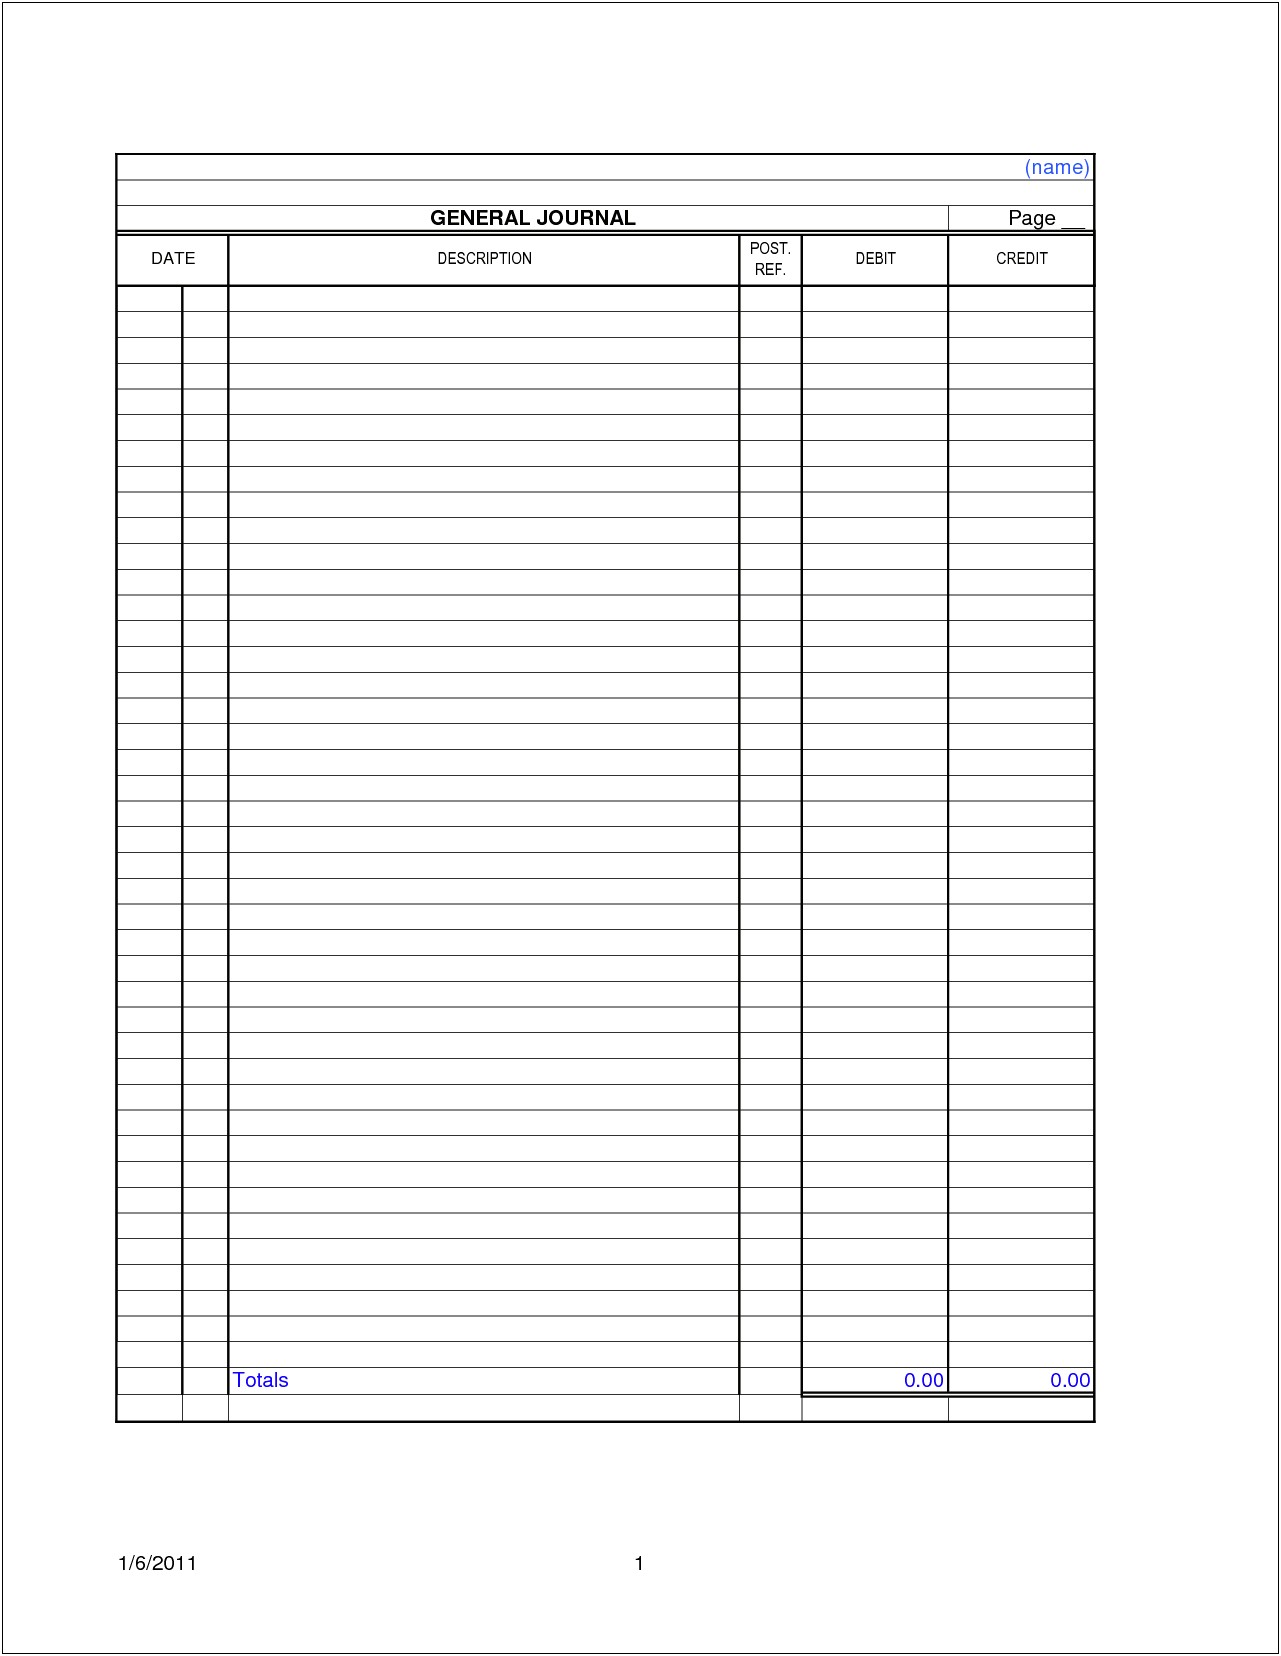 Free Template Of A General Ledger Excel Sheet